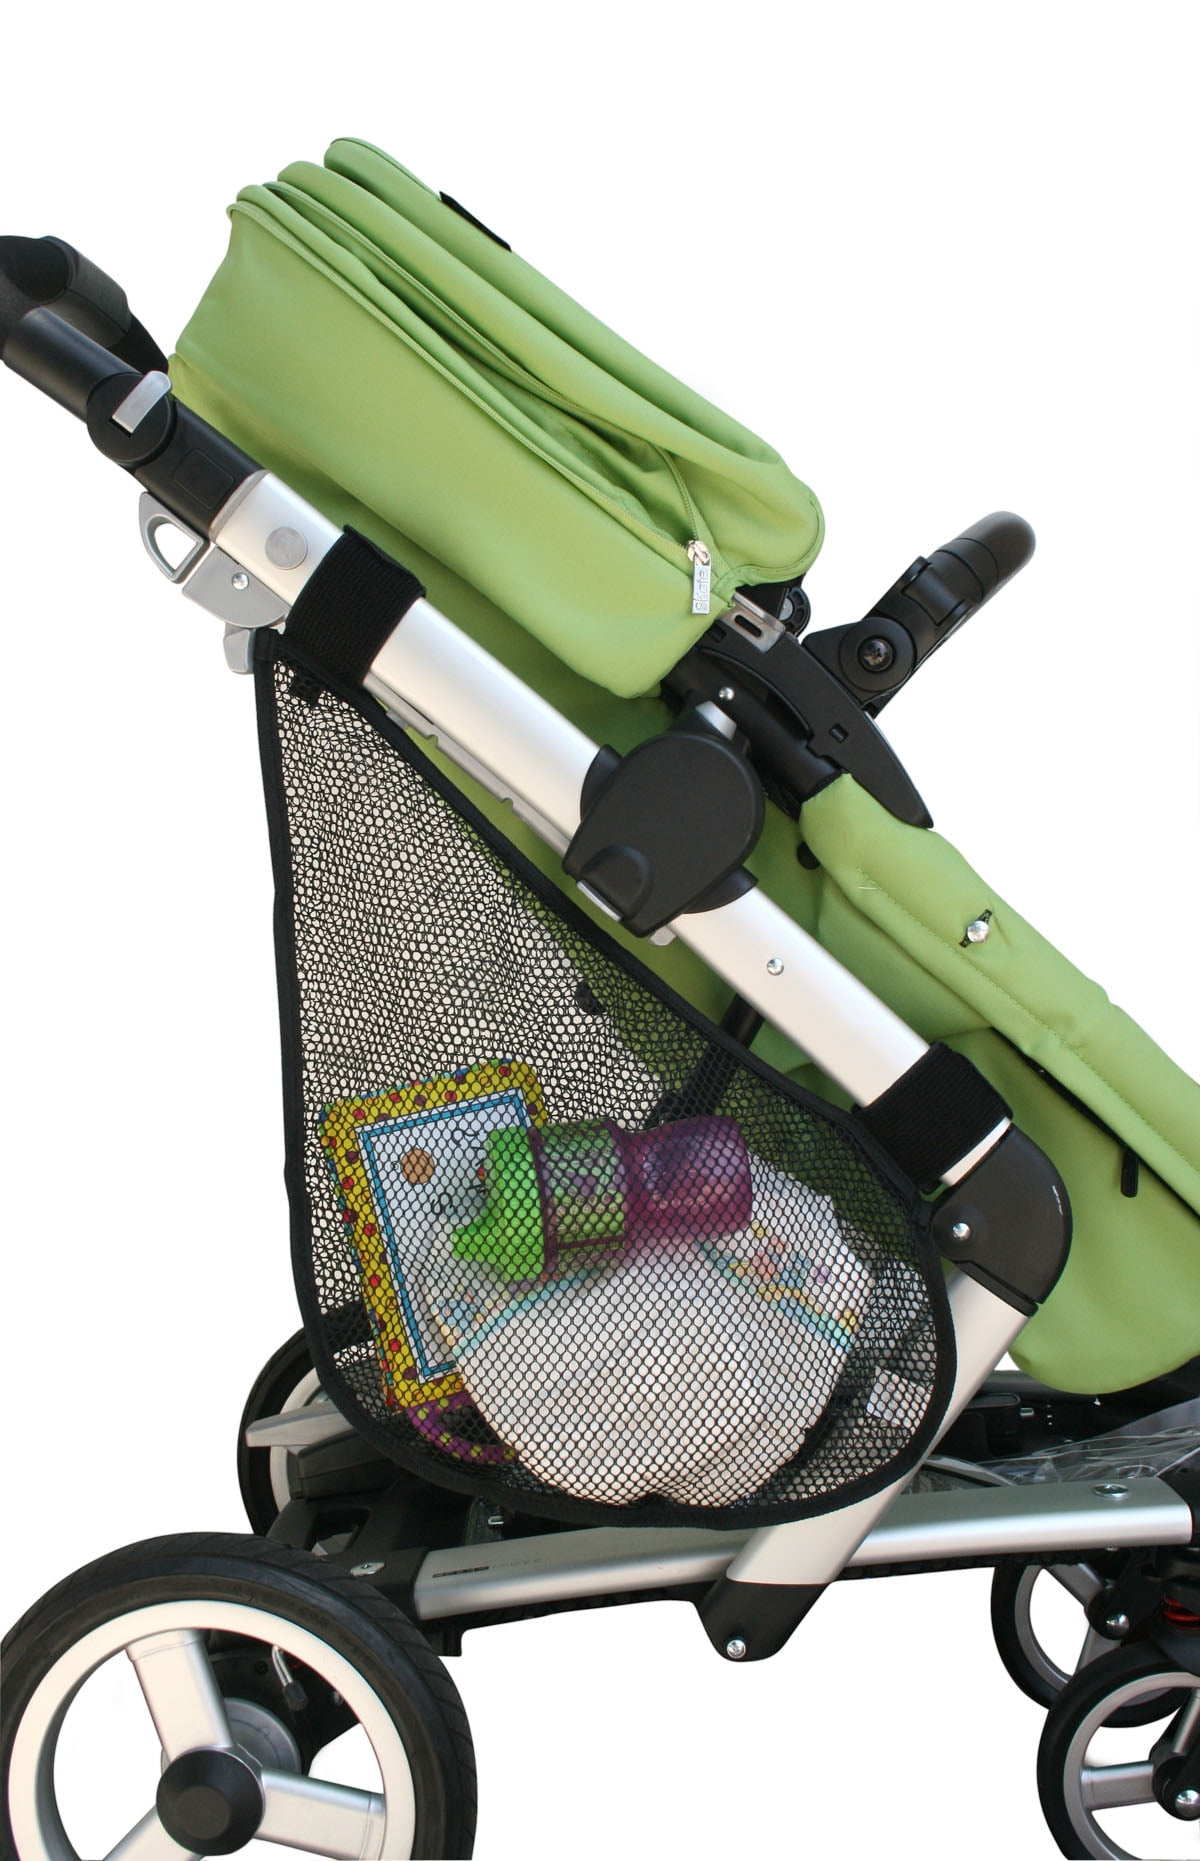 New Jeep Netting for Stroller or Infant Carrier Free Shipping! 